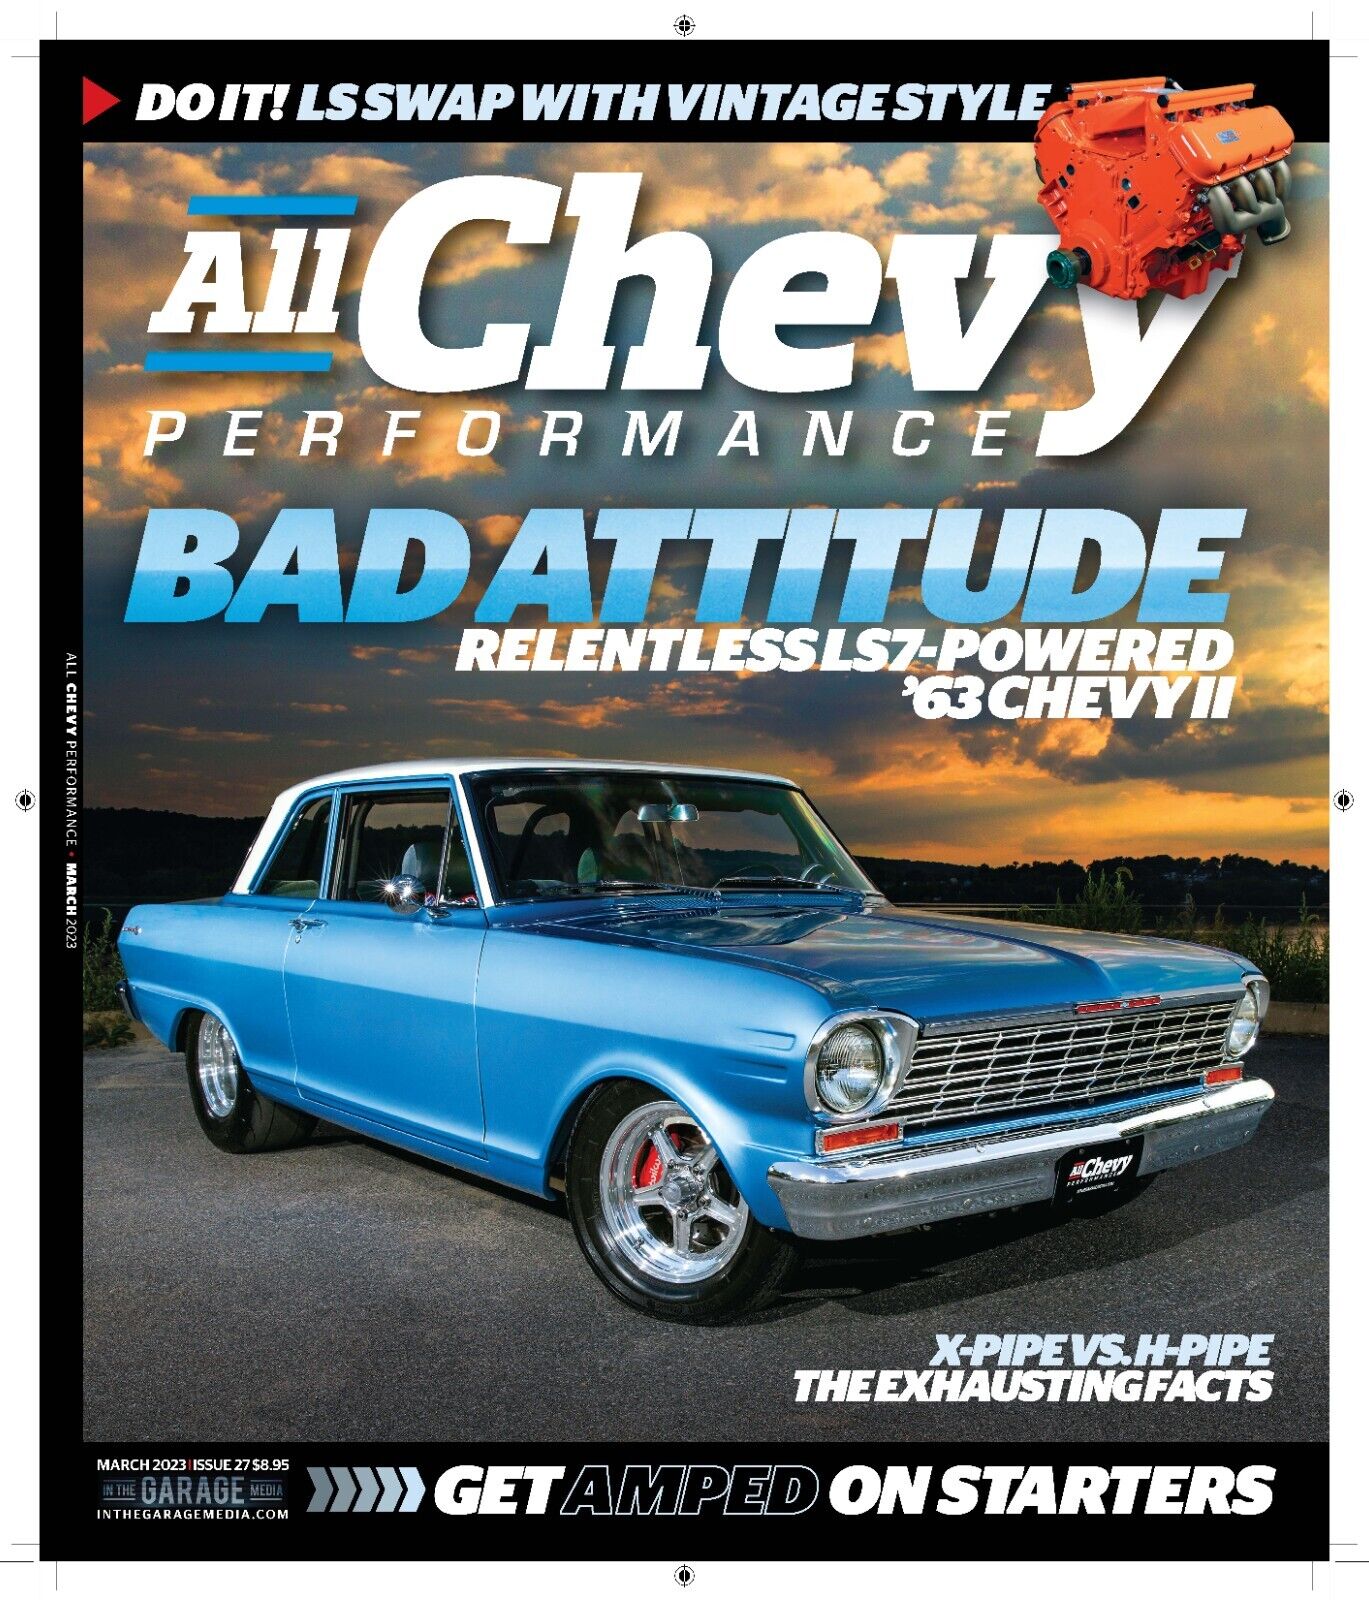 All Chevy Performance Magazine Issue #27 March 2023 - New